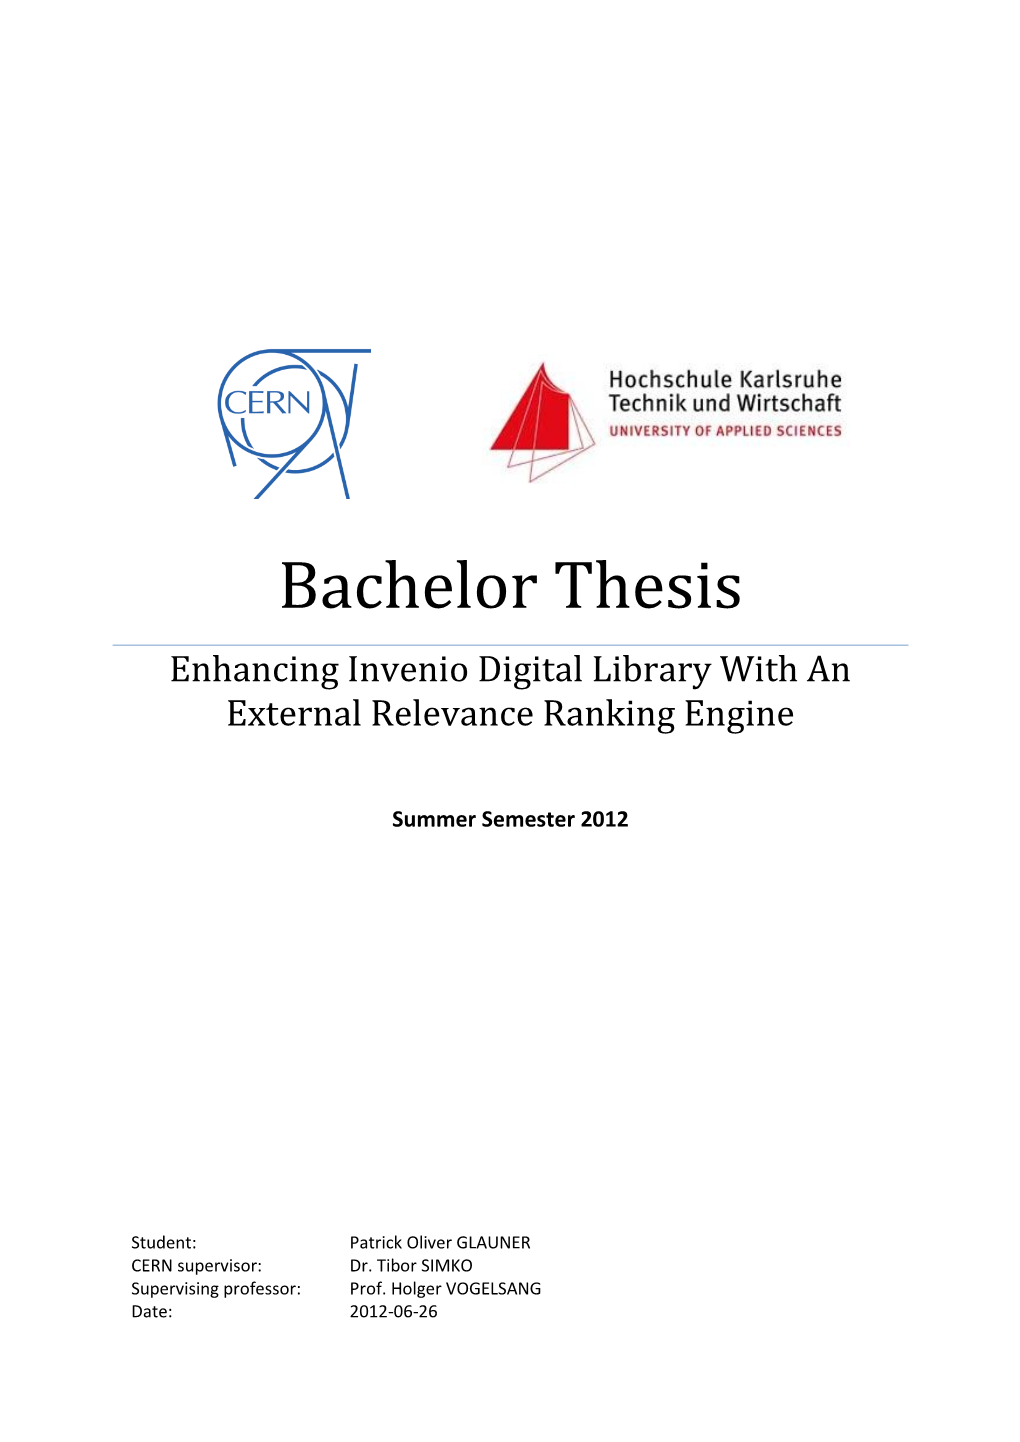 Bachelor Thesis Enhancing Invenio Digital Library with an External Relevance Ranking Engine